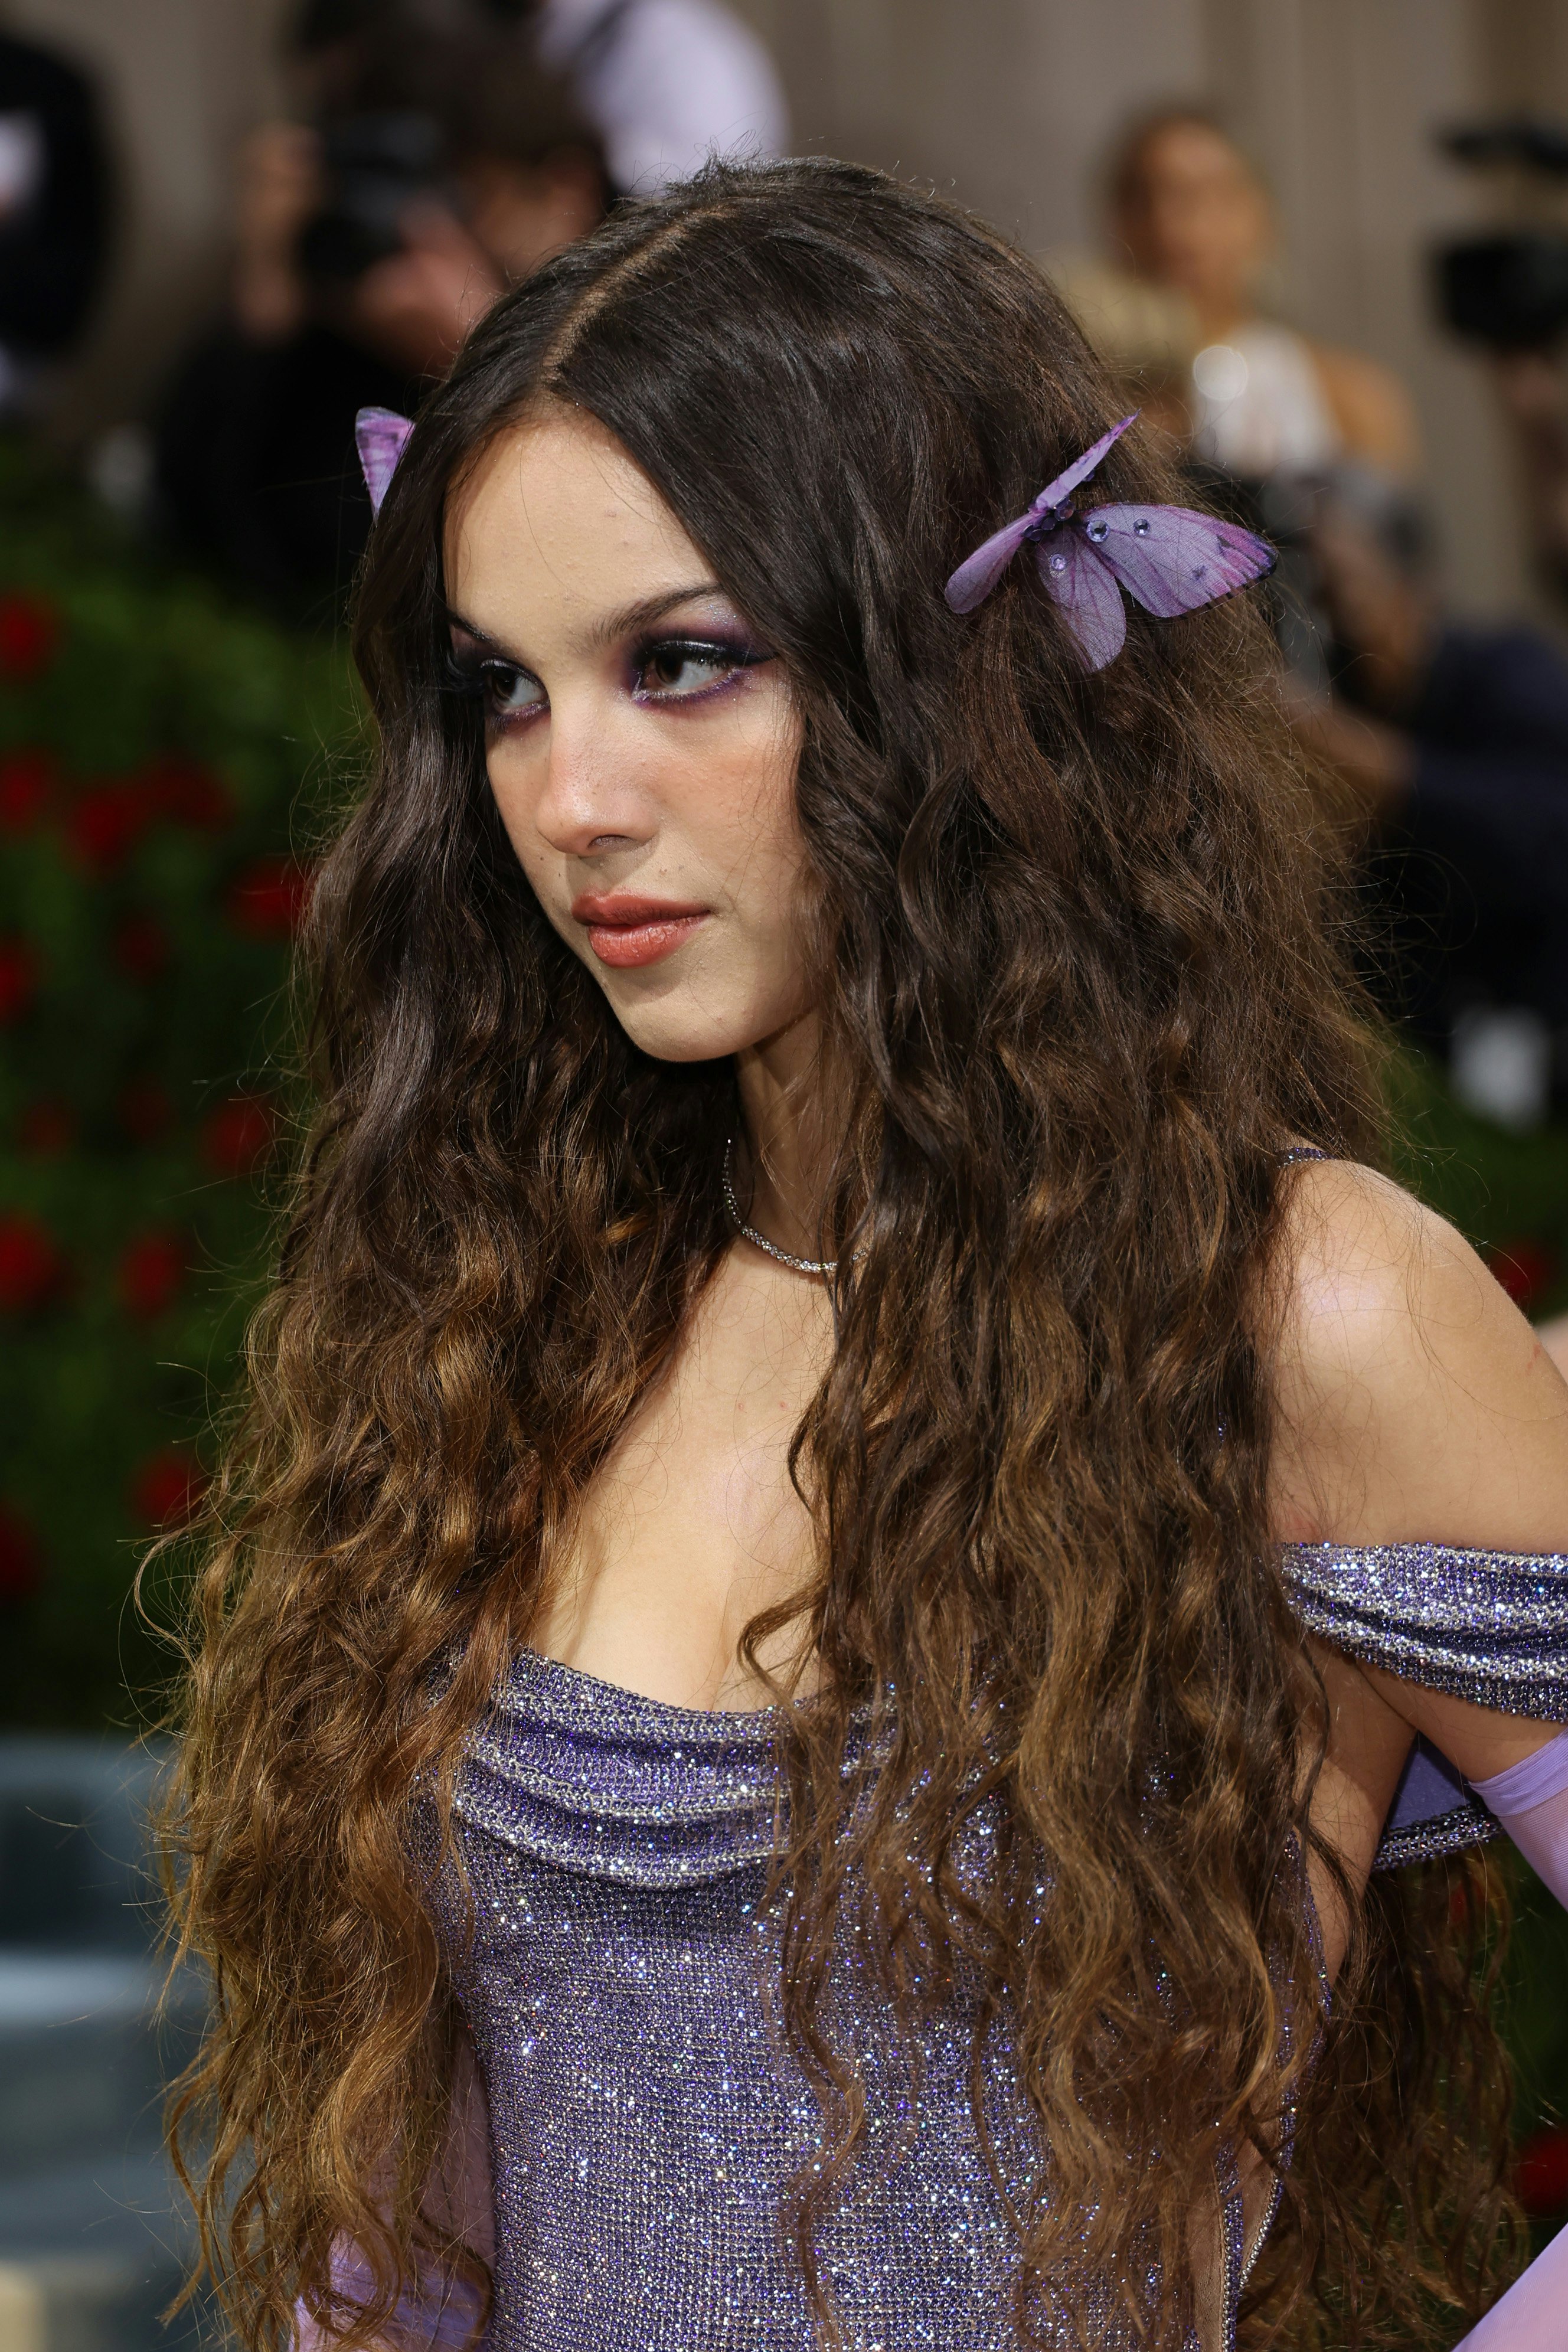 Good 4 U Olivia Rodrigos Met Gala Butterfly Hair Clips Are On The Way